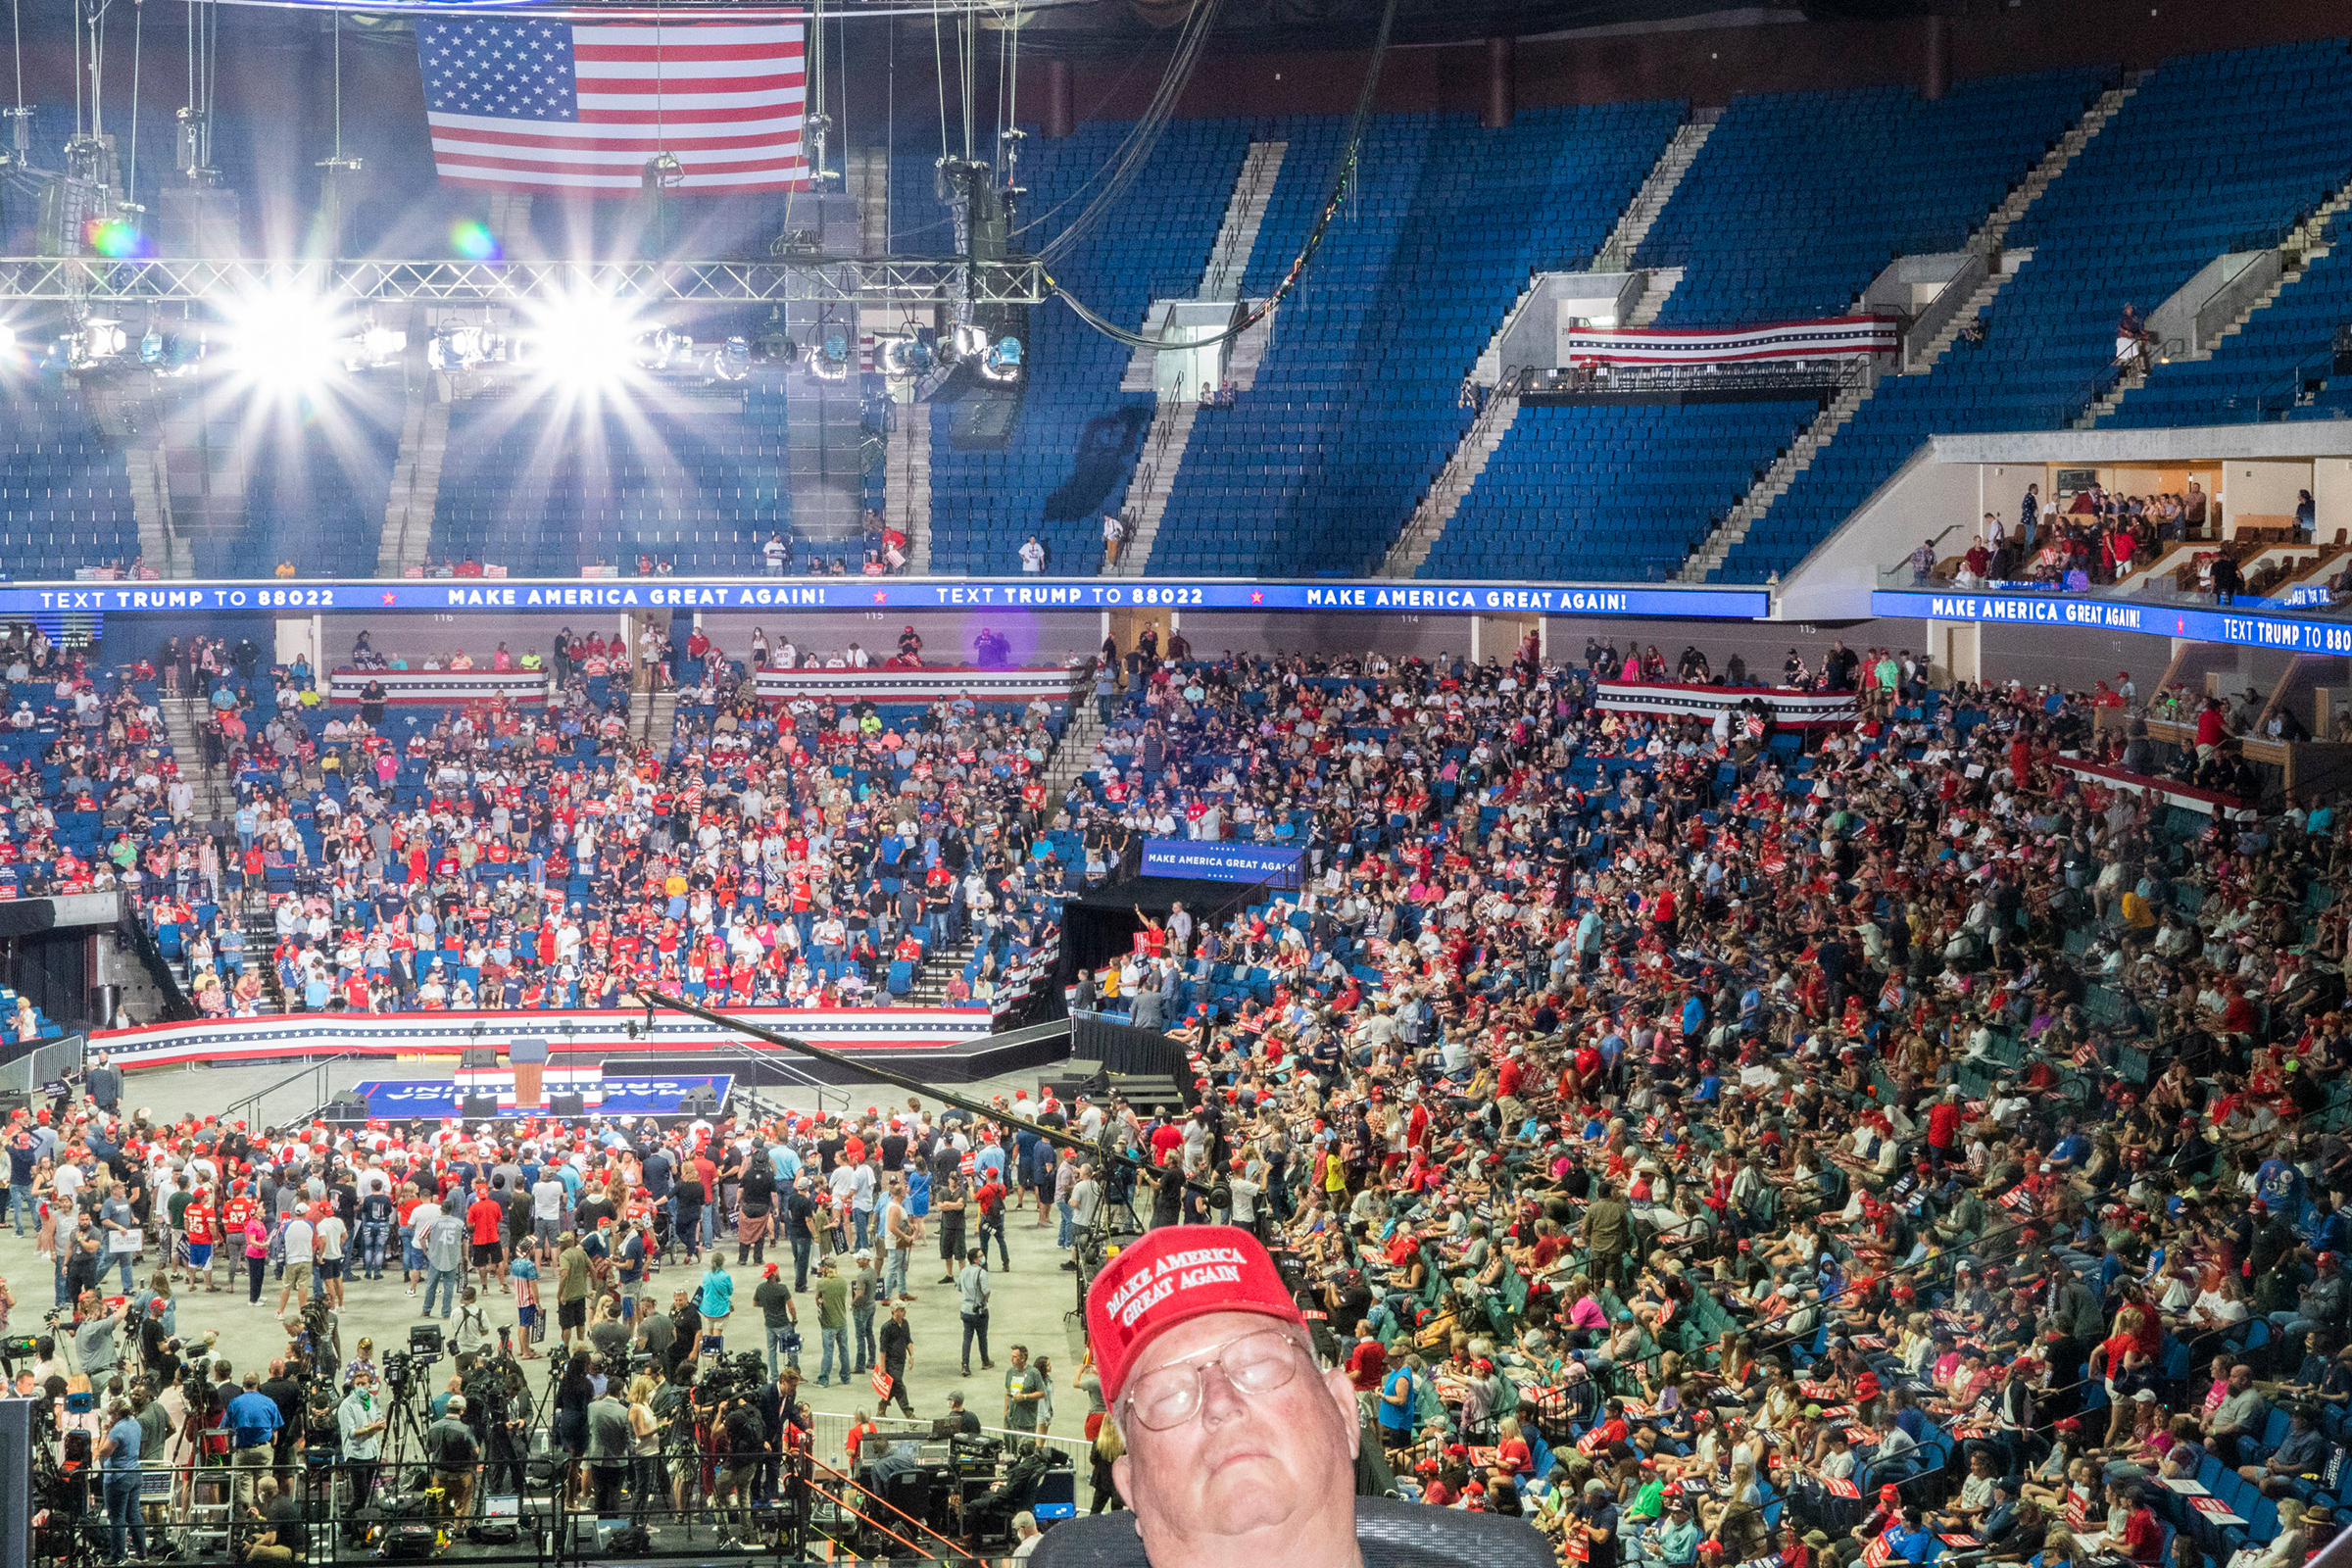 2020. Tulsa, Oklahoma. USA. BOK Center, the site of Donald Trump's first rally of the Covid-19 Pandemic.